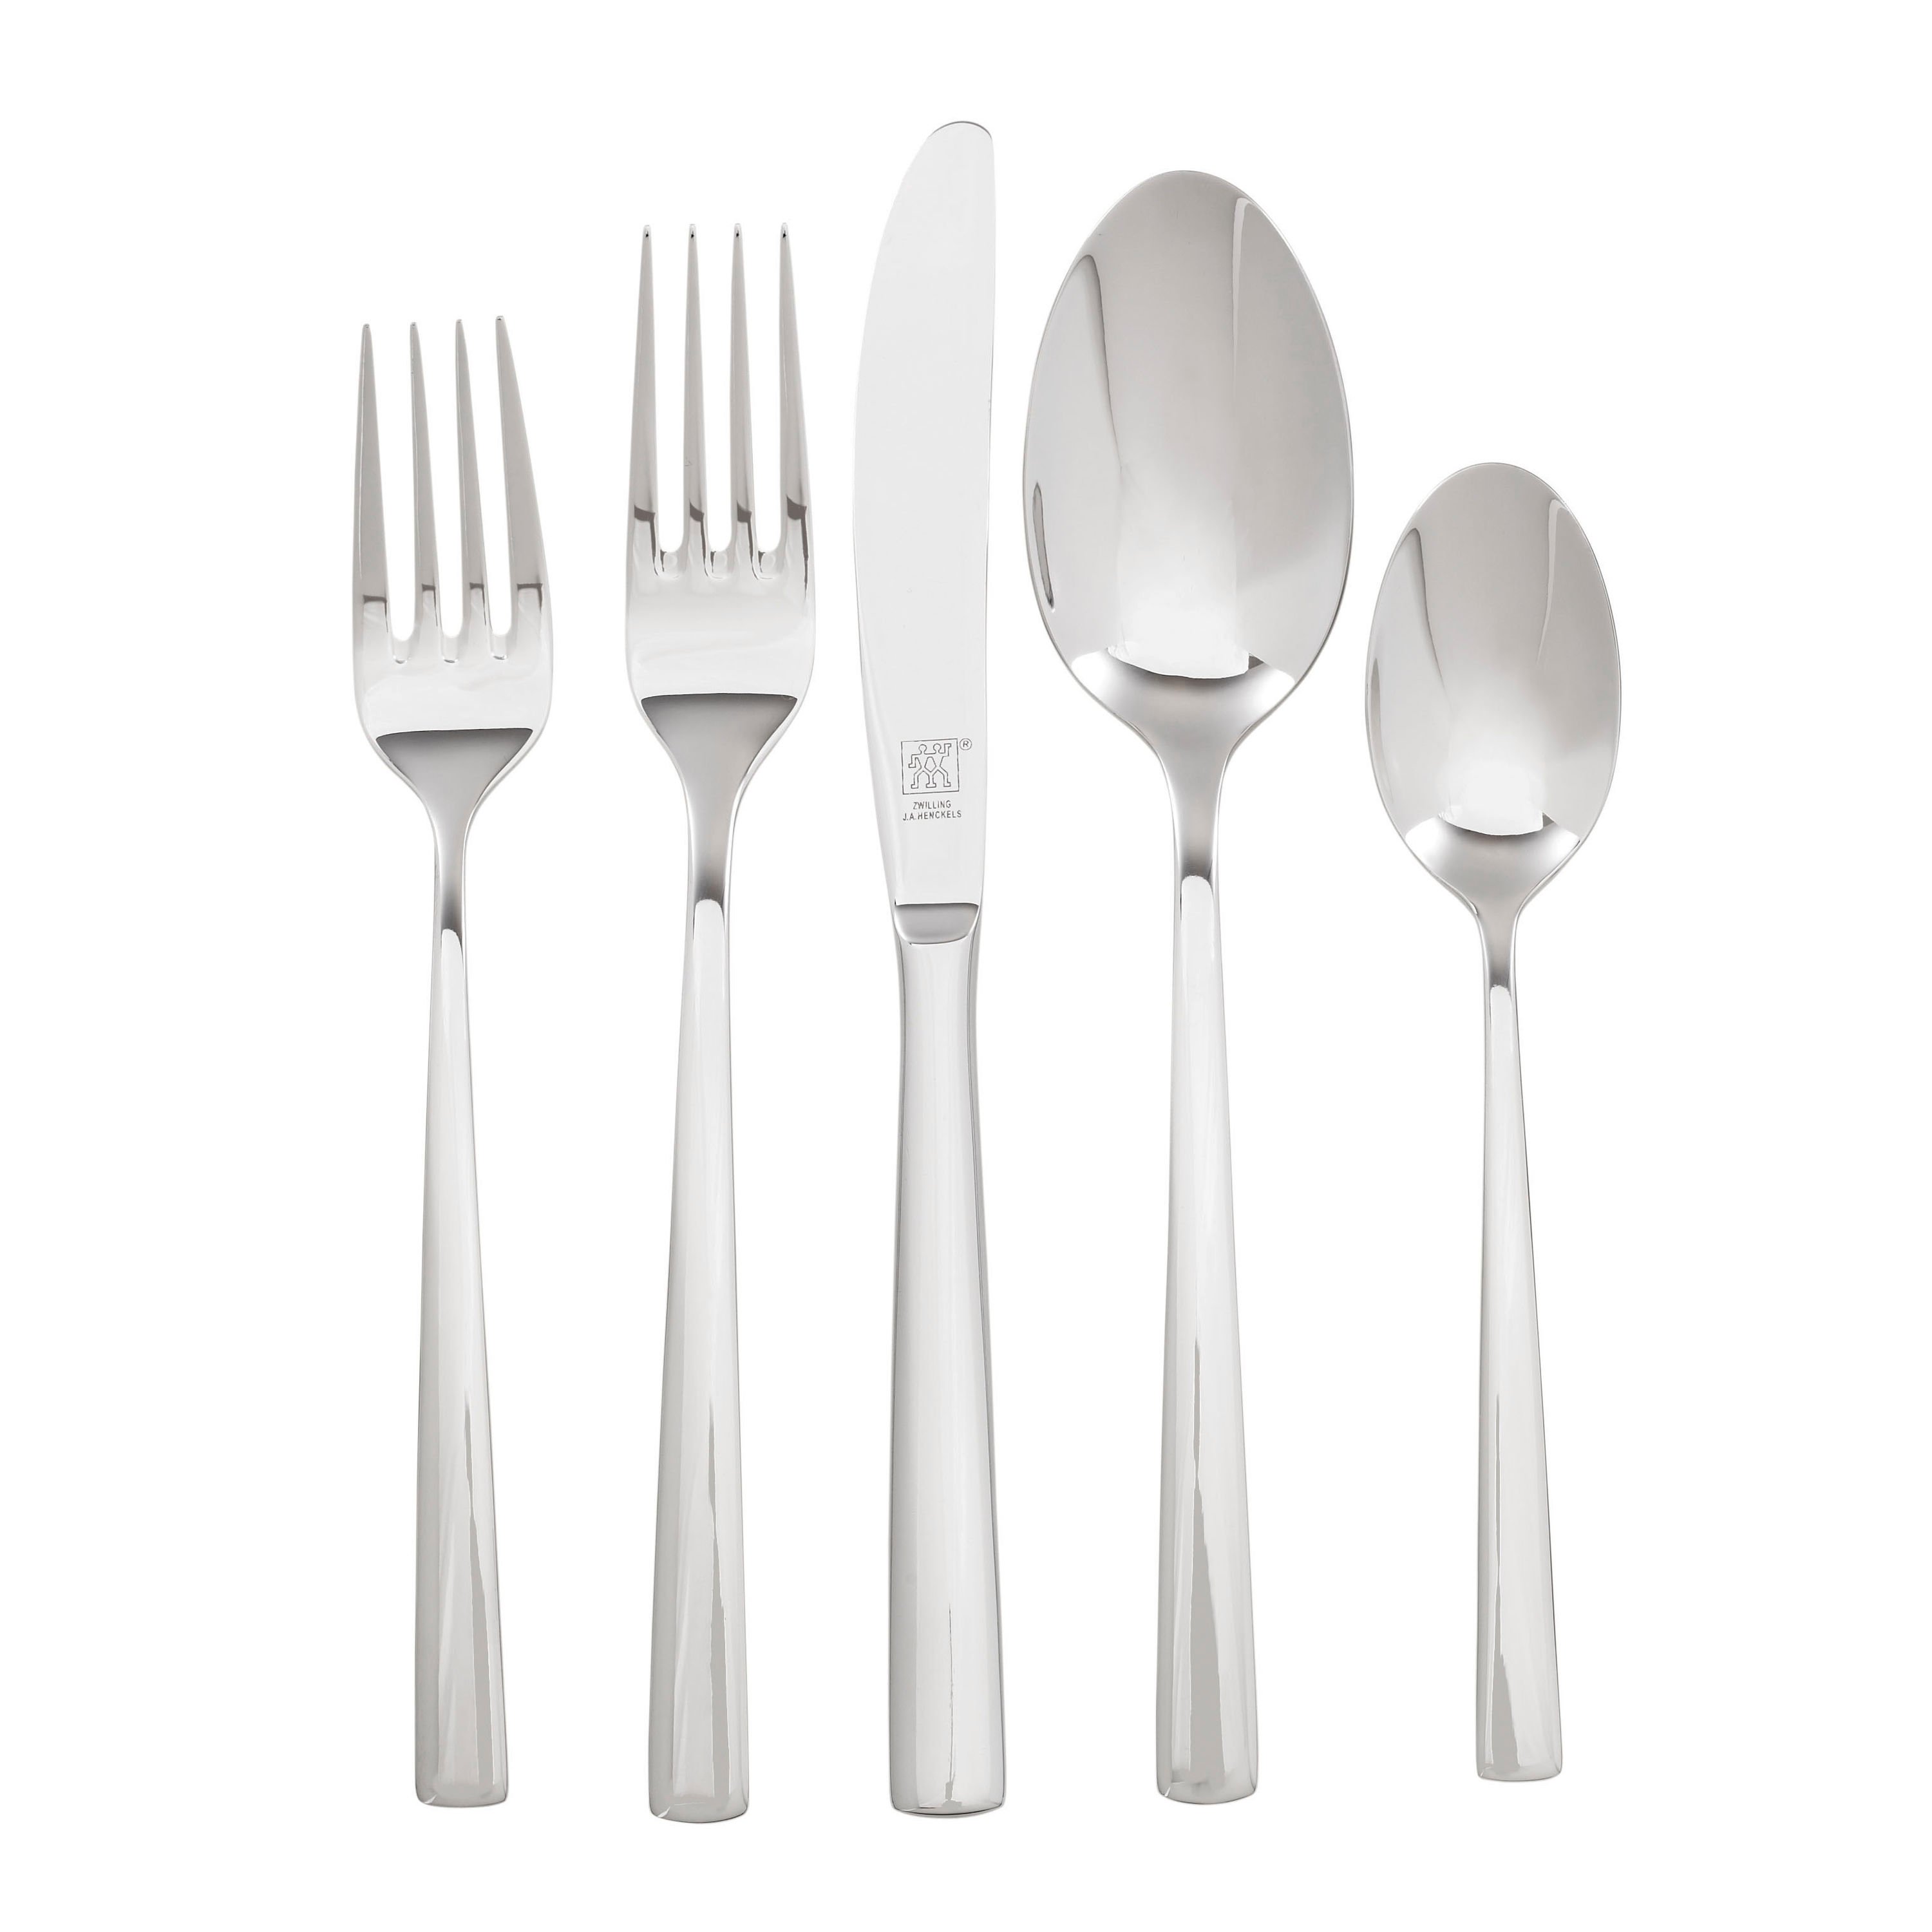 Your Choice Silverware NEW Oneida Stainless FORTE Flatware 